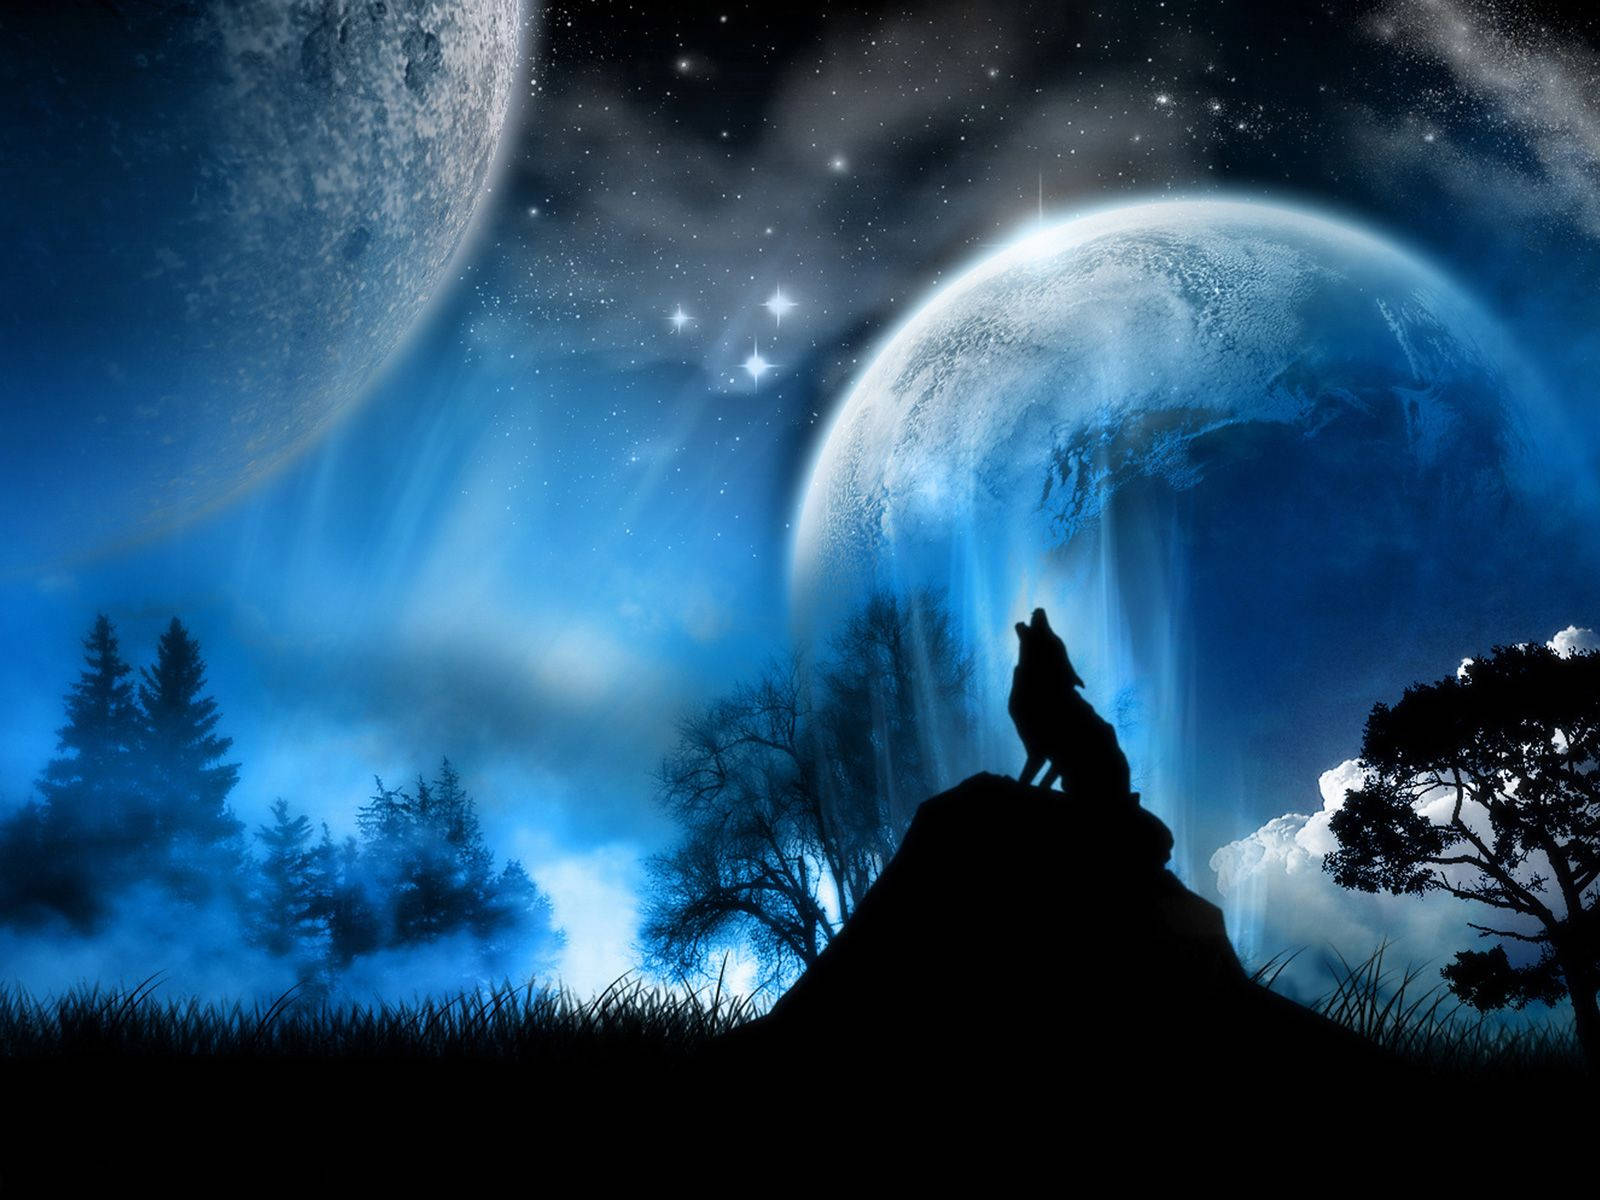 Cool Black Wolf Howling At Magical Sky